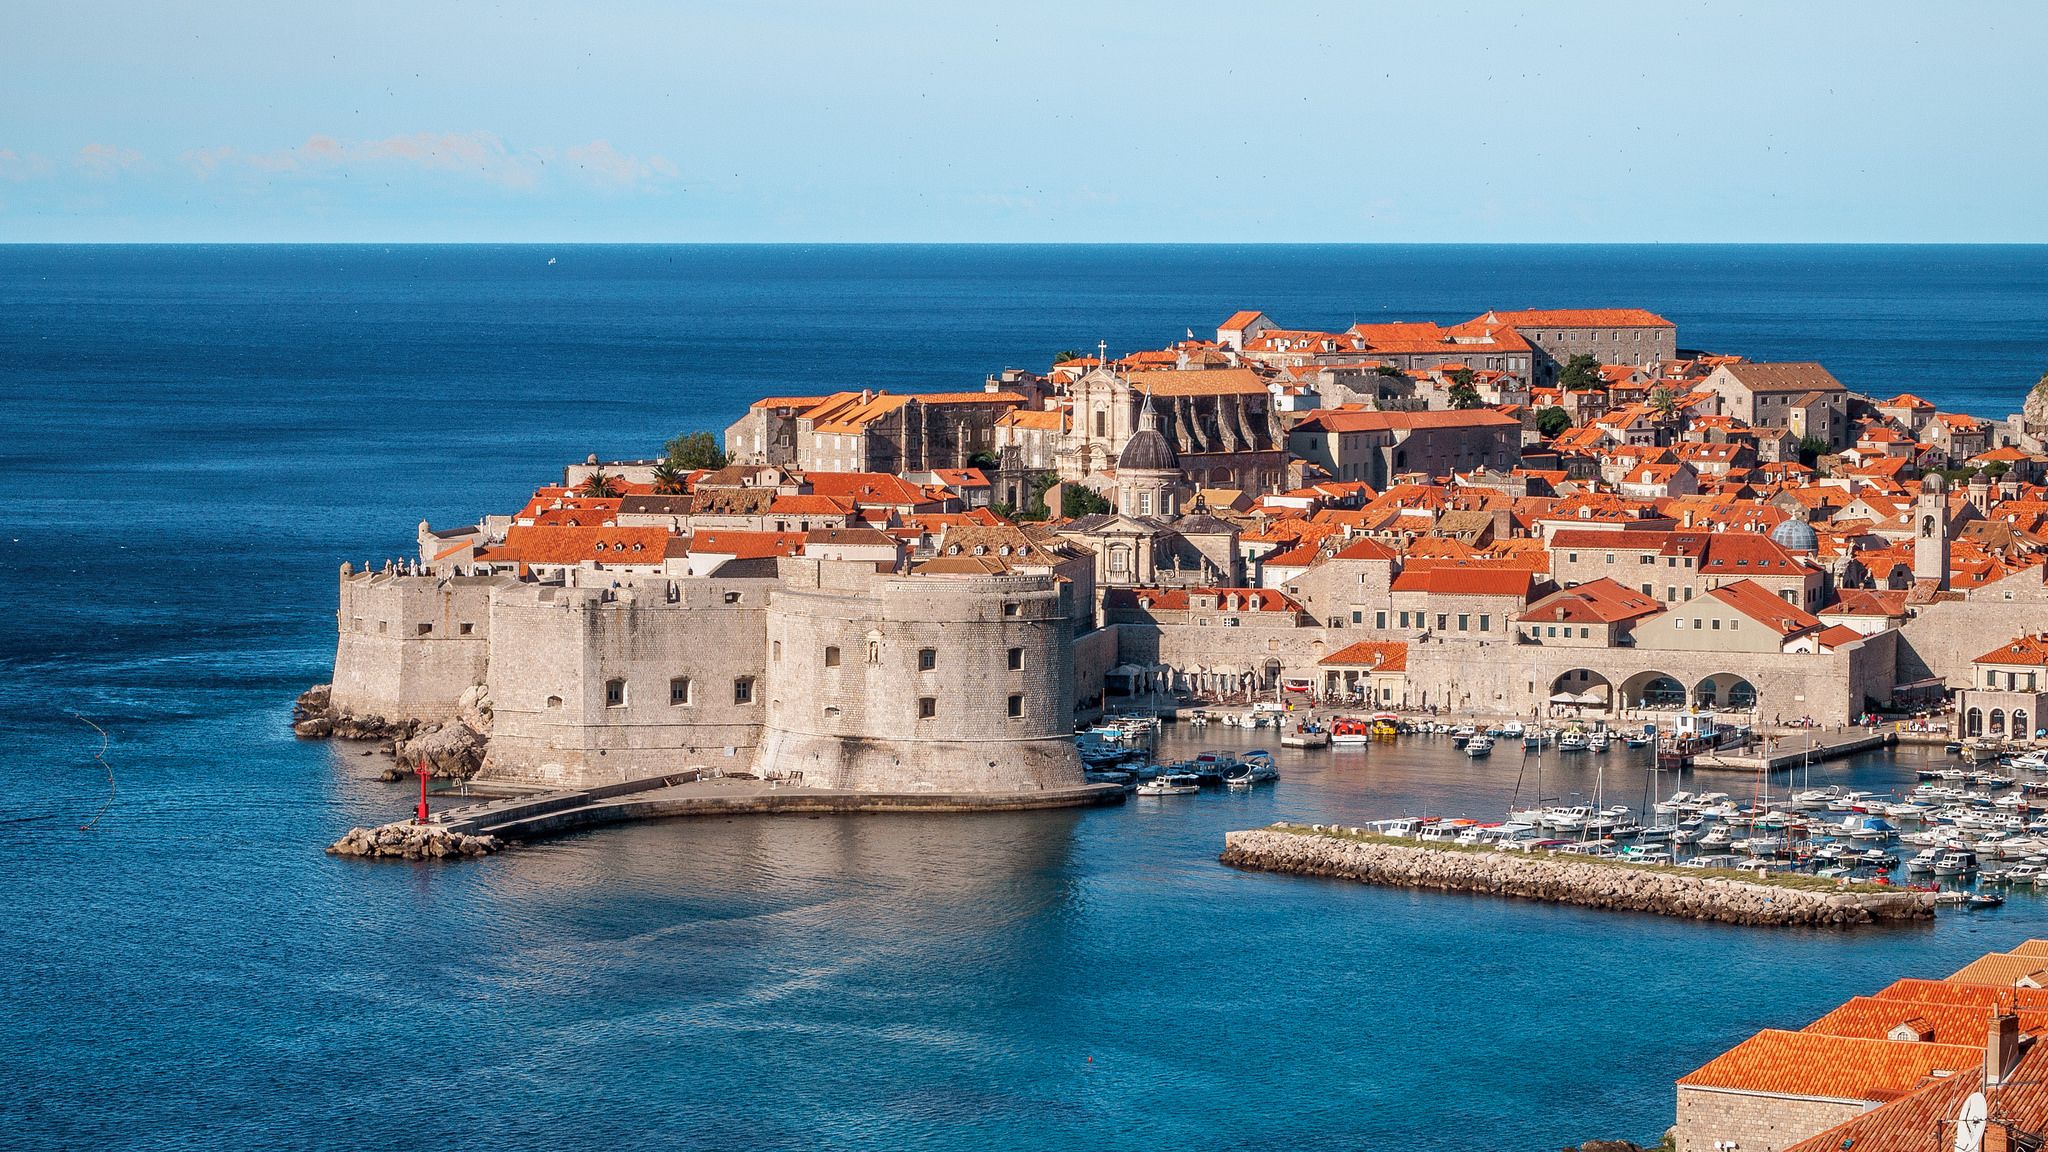 The Best Things to Do And See in Dubrovnik, Croatia